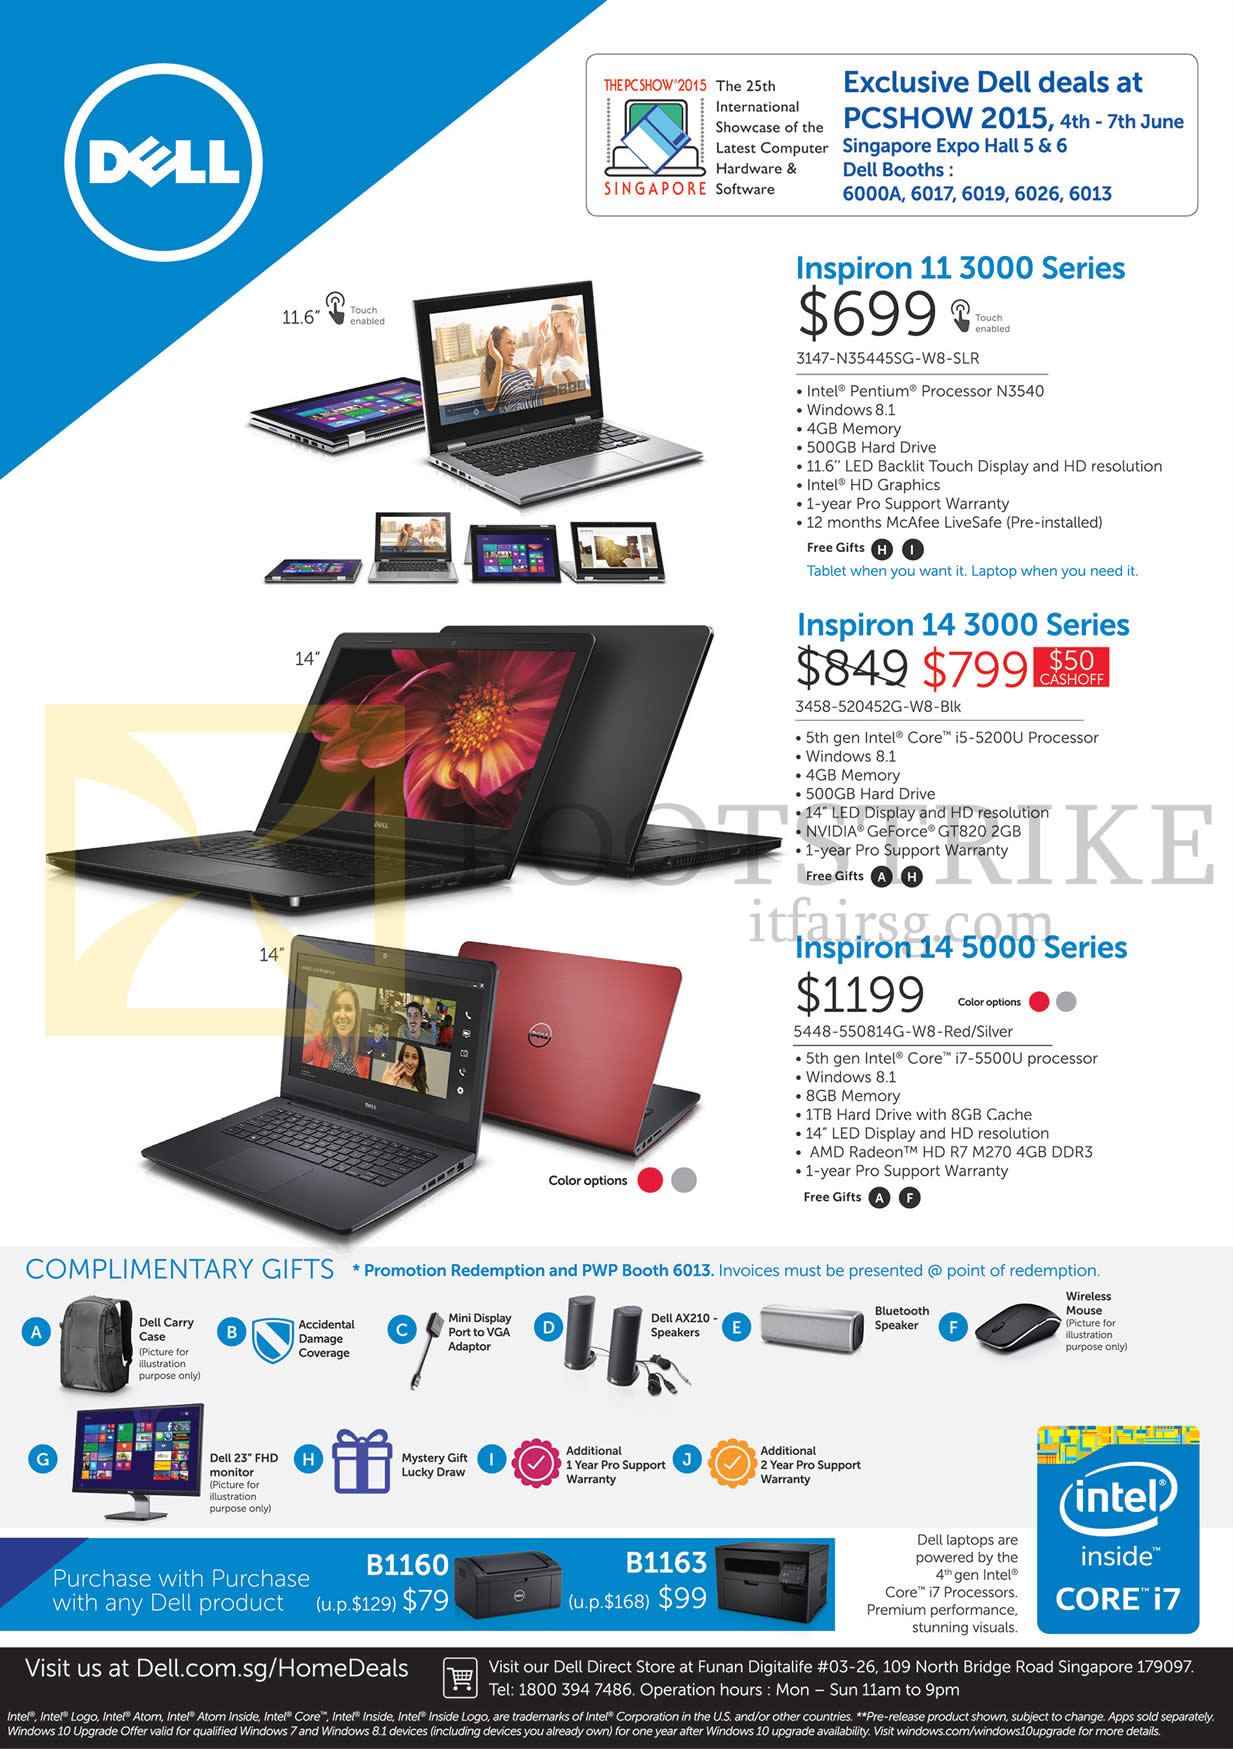 PC SHOW 2015 price list image brochure of Dell Notebooks, Free Gifts, Inspiron 11 3000 Series, 14 3000 Series, 14 5000 Series